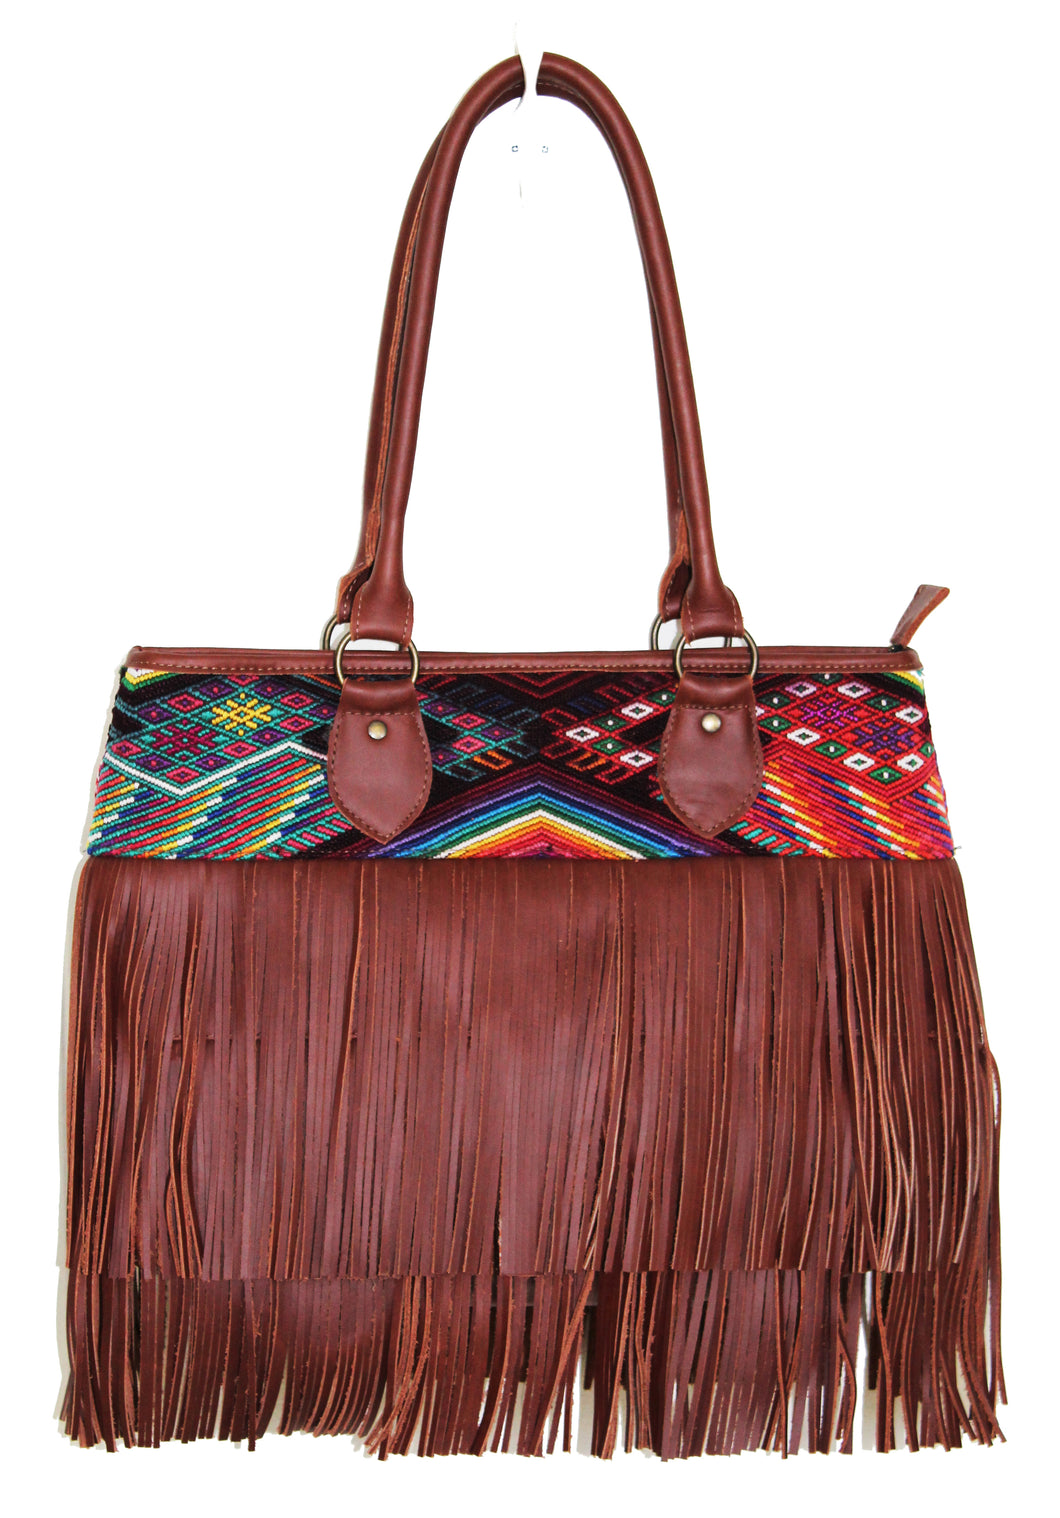 MoonLake Bags Ethical Fashion Brand medium DEDE fringe over the shoulder bag in red brown leather and handwoven geometric huipil